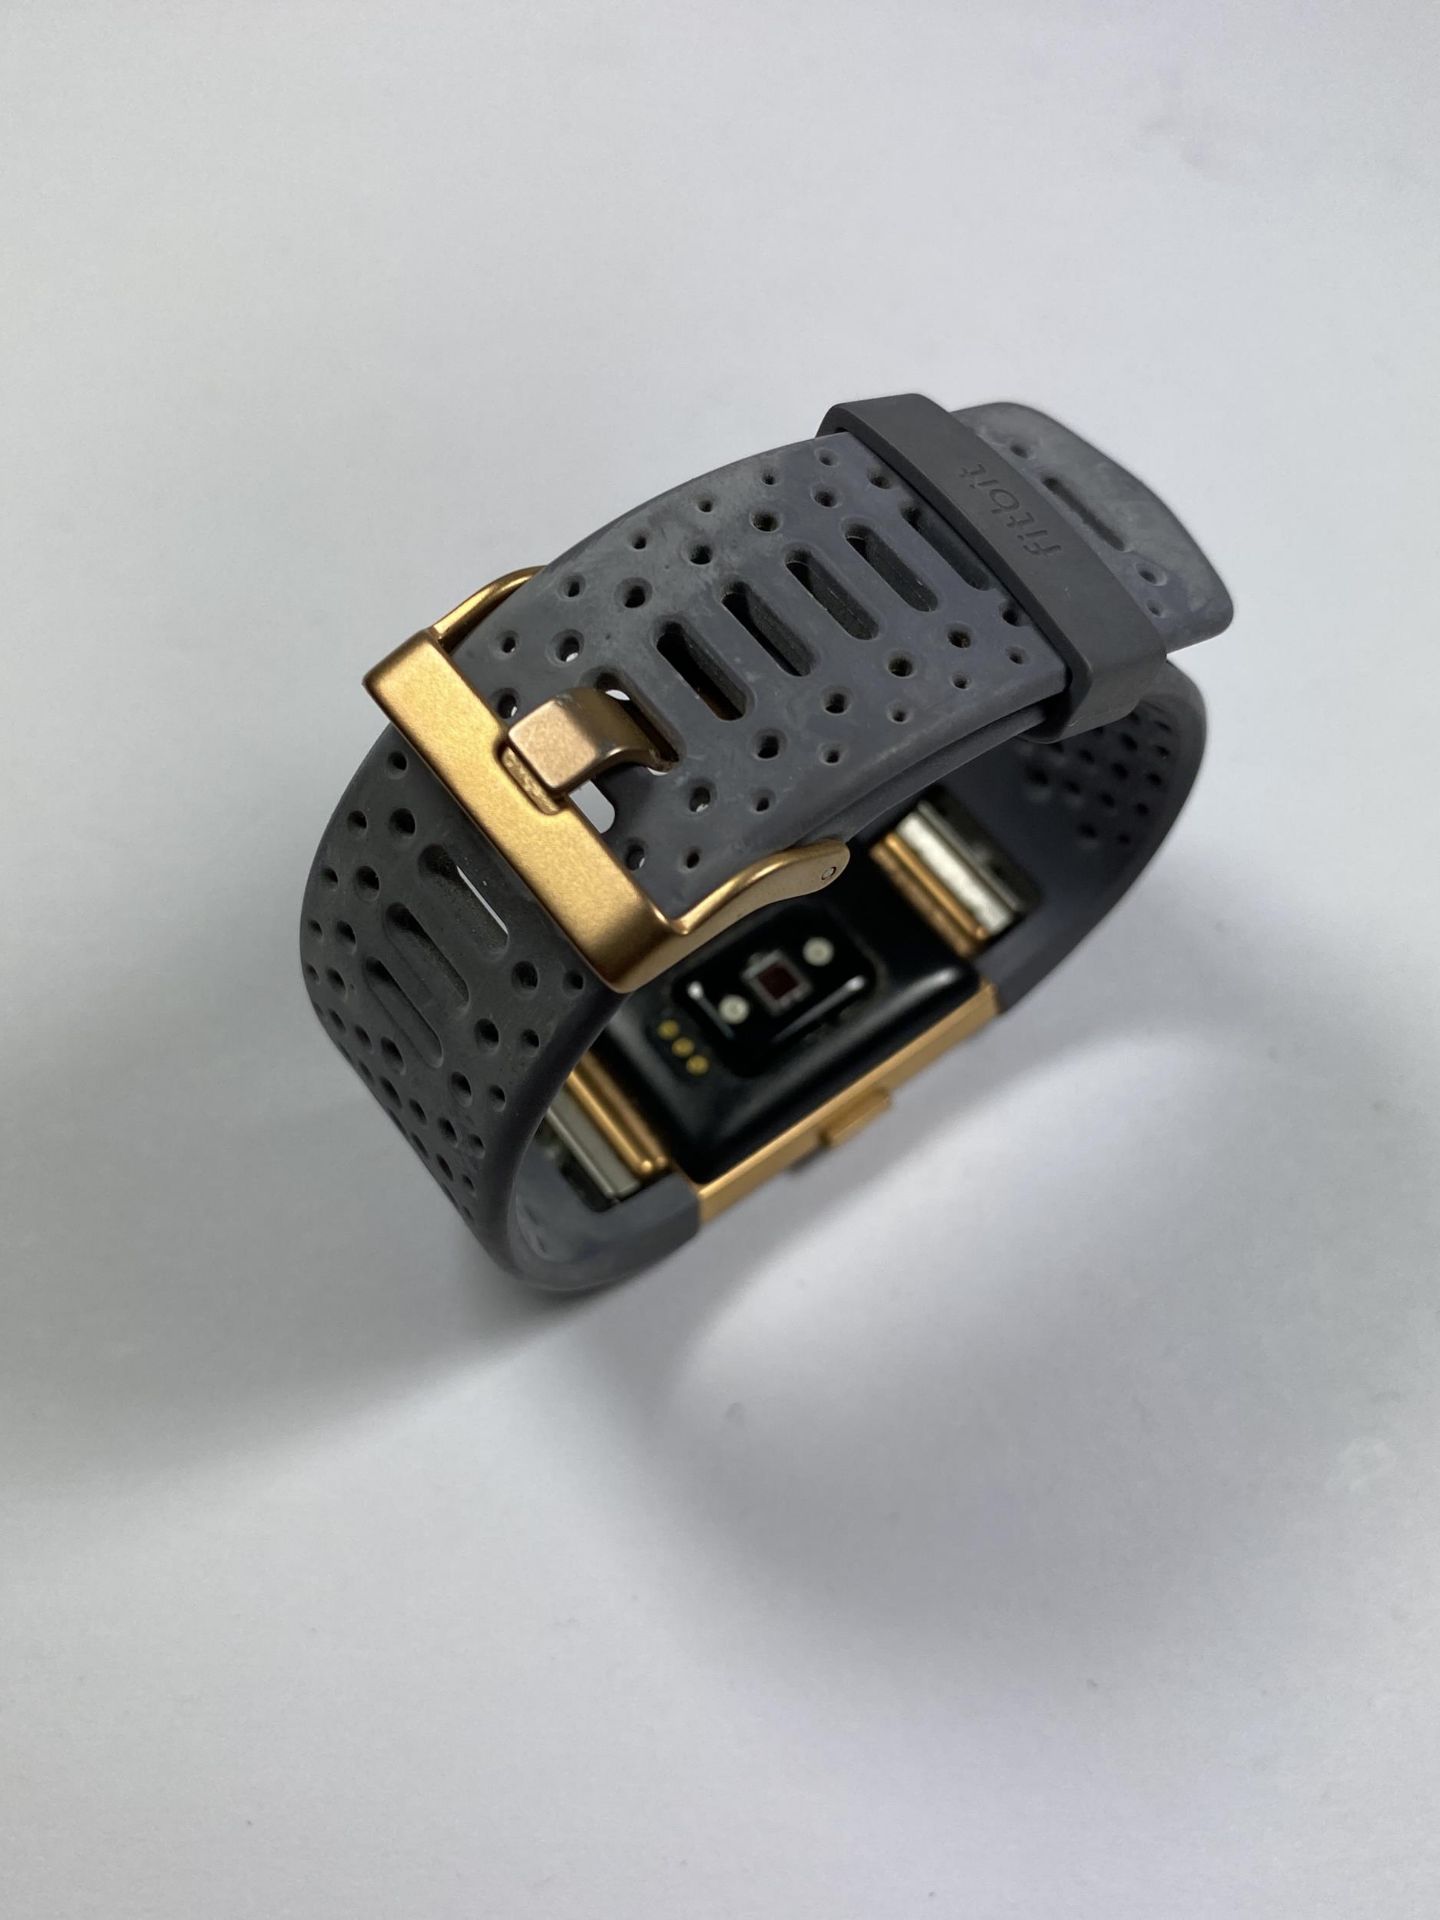 A FITBIT WATCH IN WORKING ORDER - Image 3 of 3